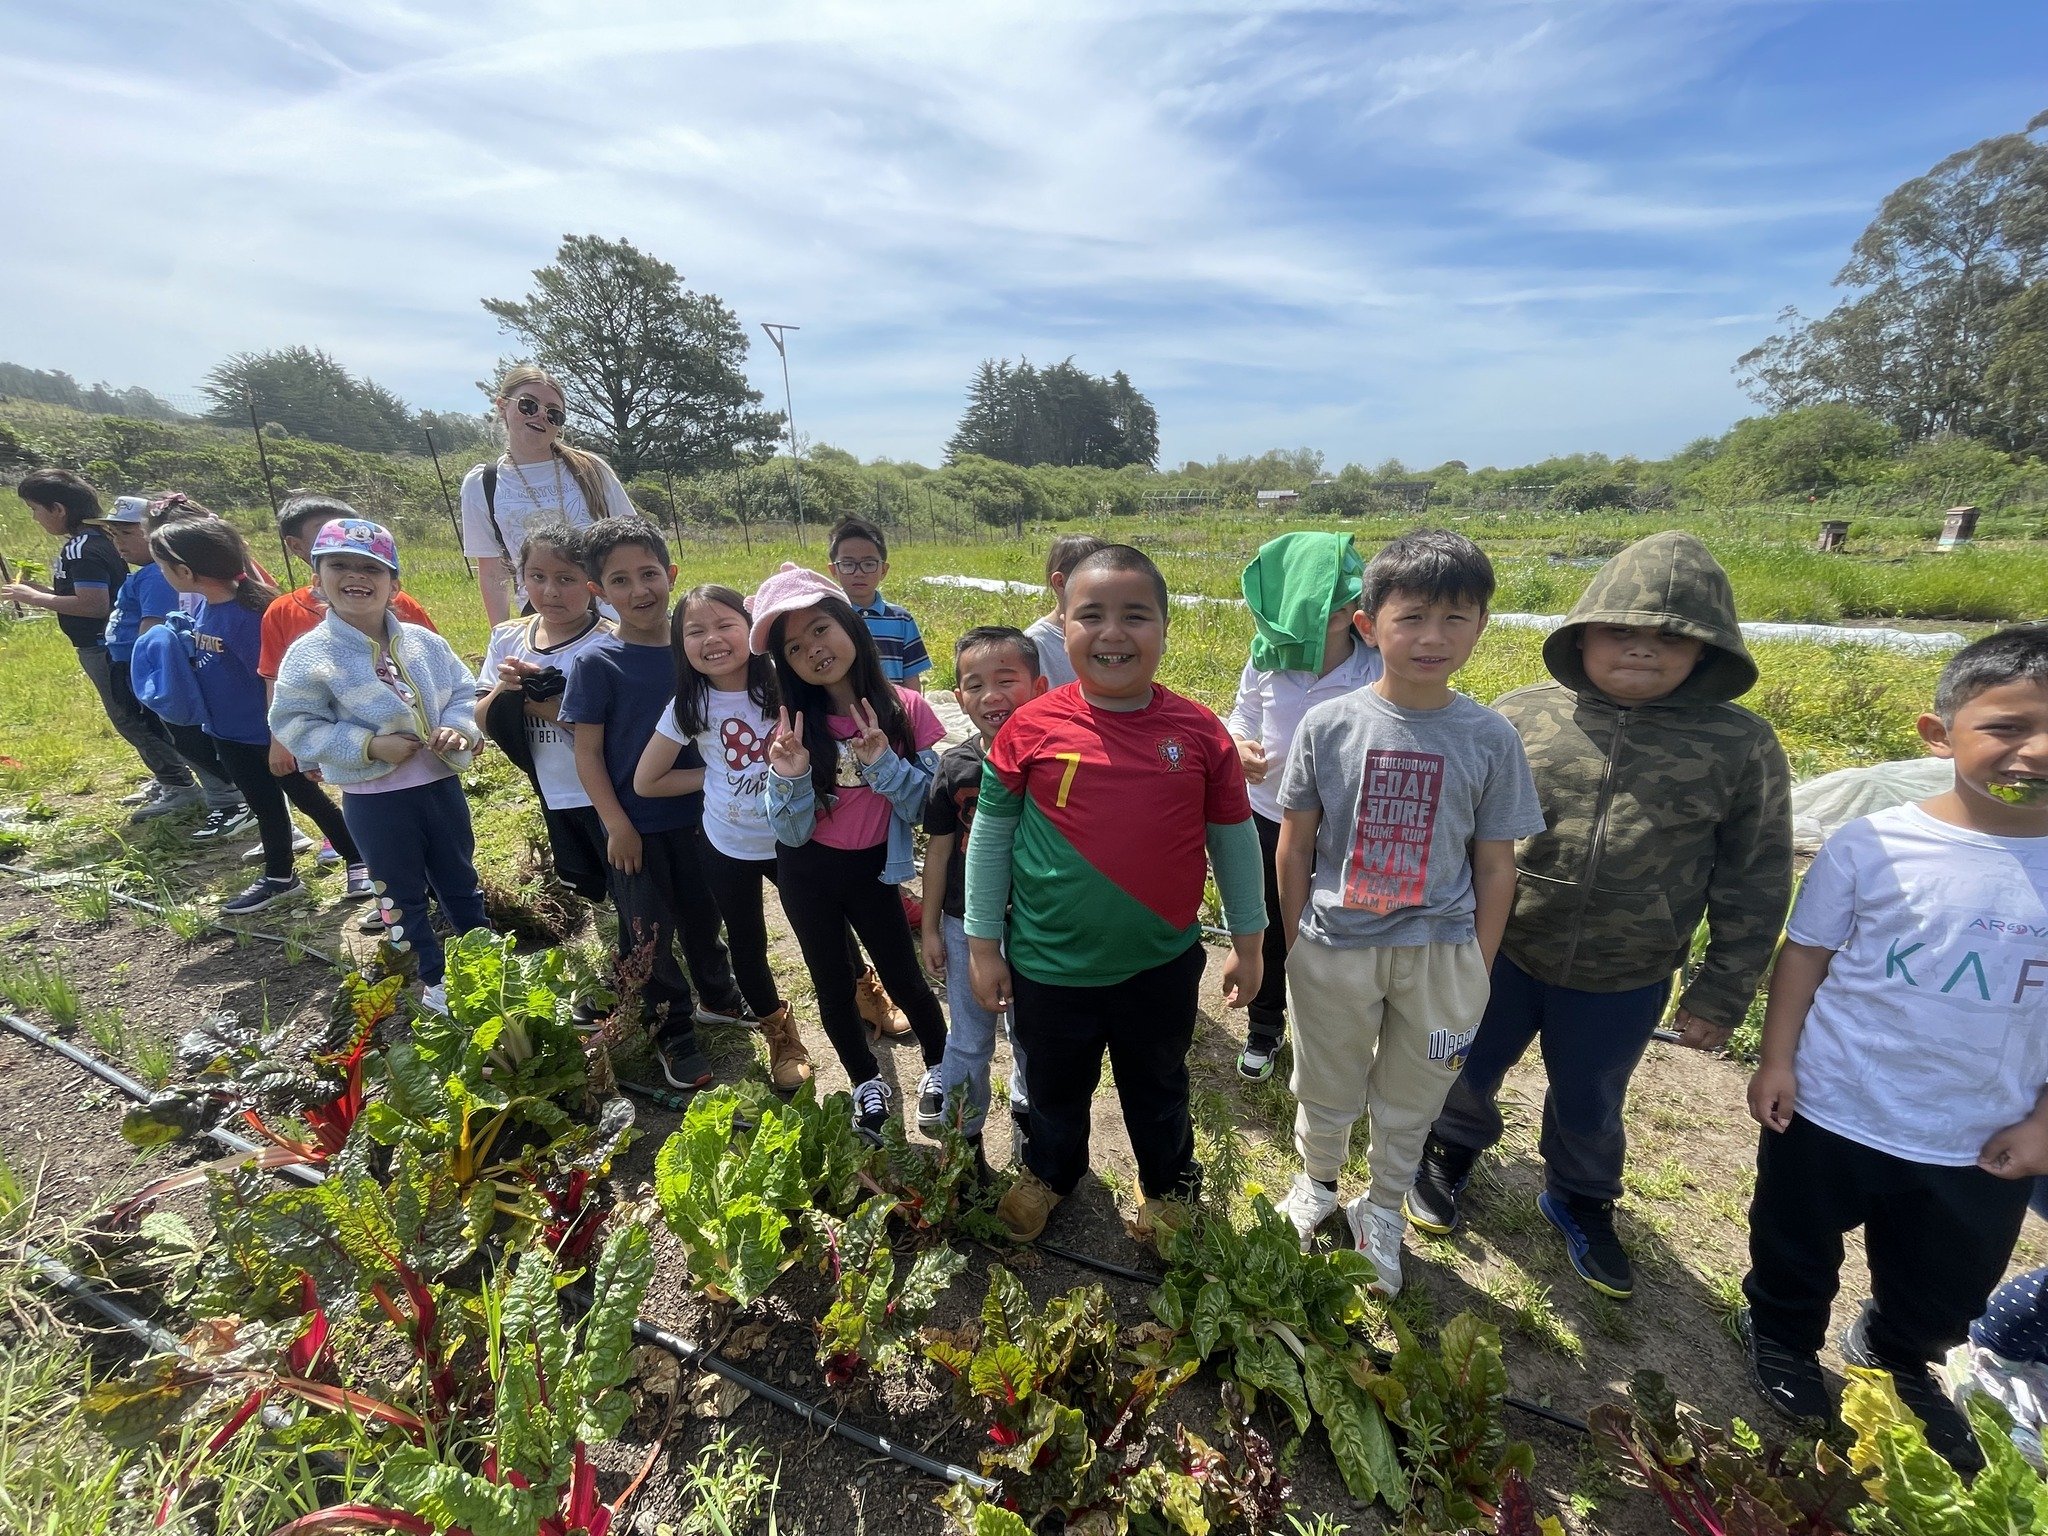 Kids in the chard! This is a field trip to The HEAL Project farm -- the San Mateo County School Farm, in El Granada, California on a day in April. We grow healthy kids from the ground up, right here on the coastside. Happy!
#thehealprojectusa #elgran